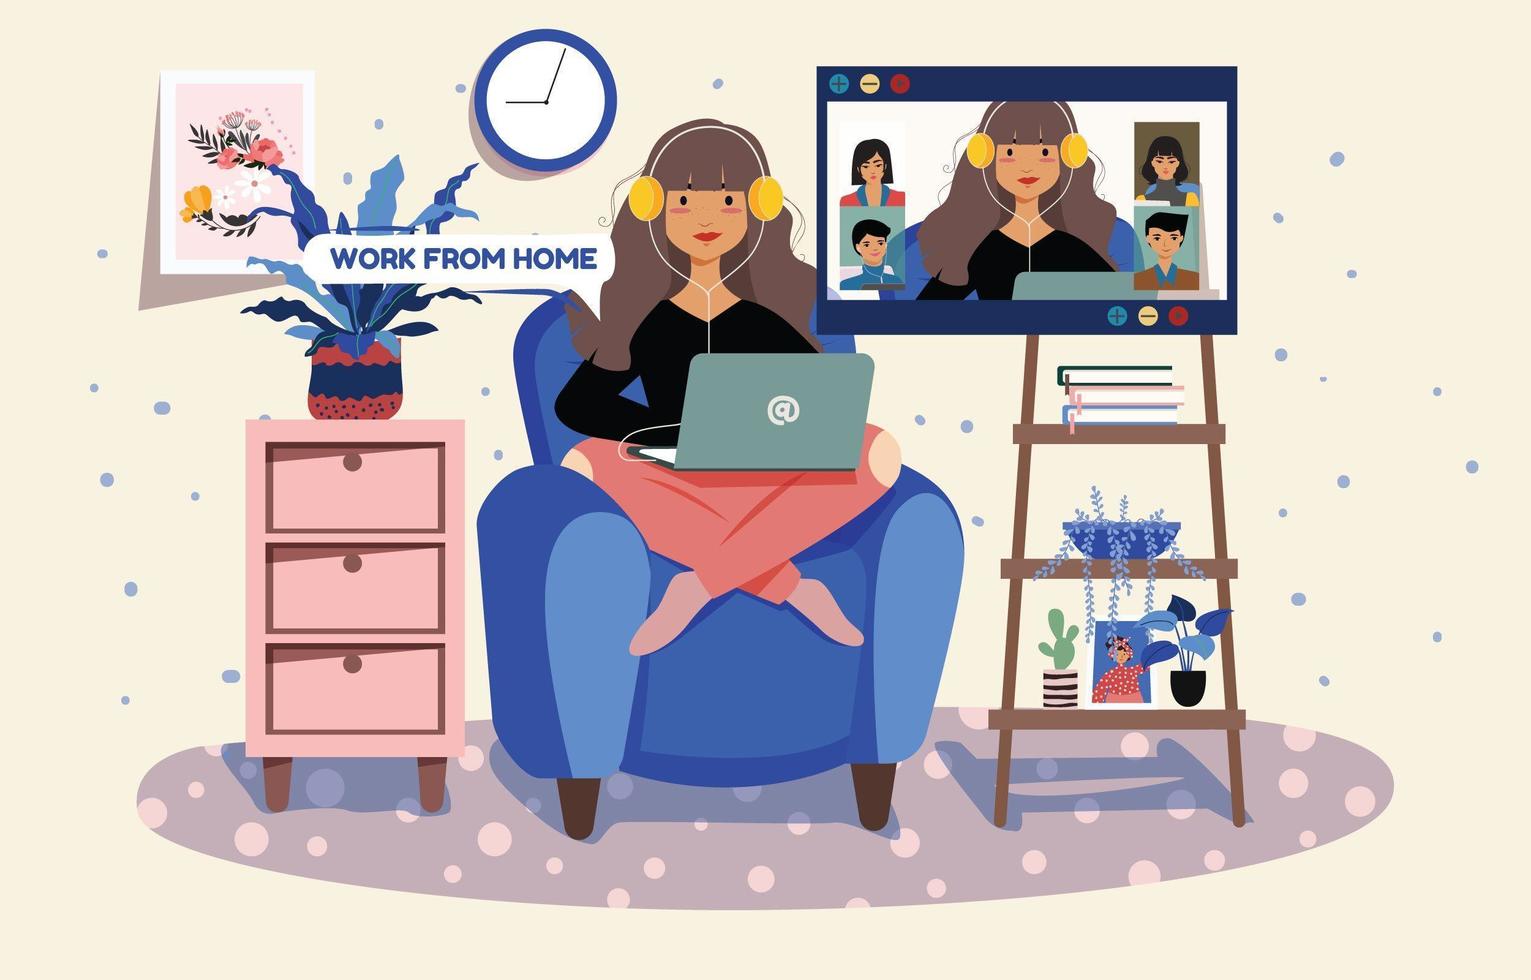 Meeting Together When Working from Home vector